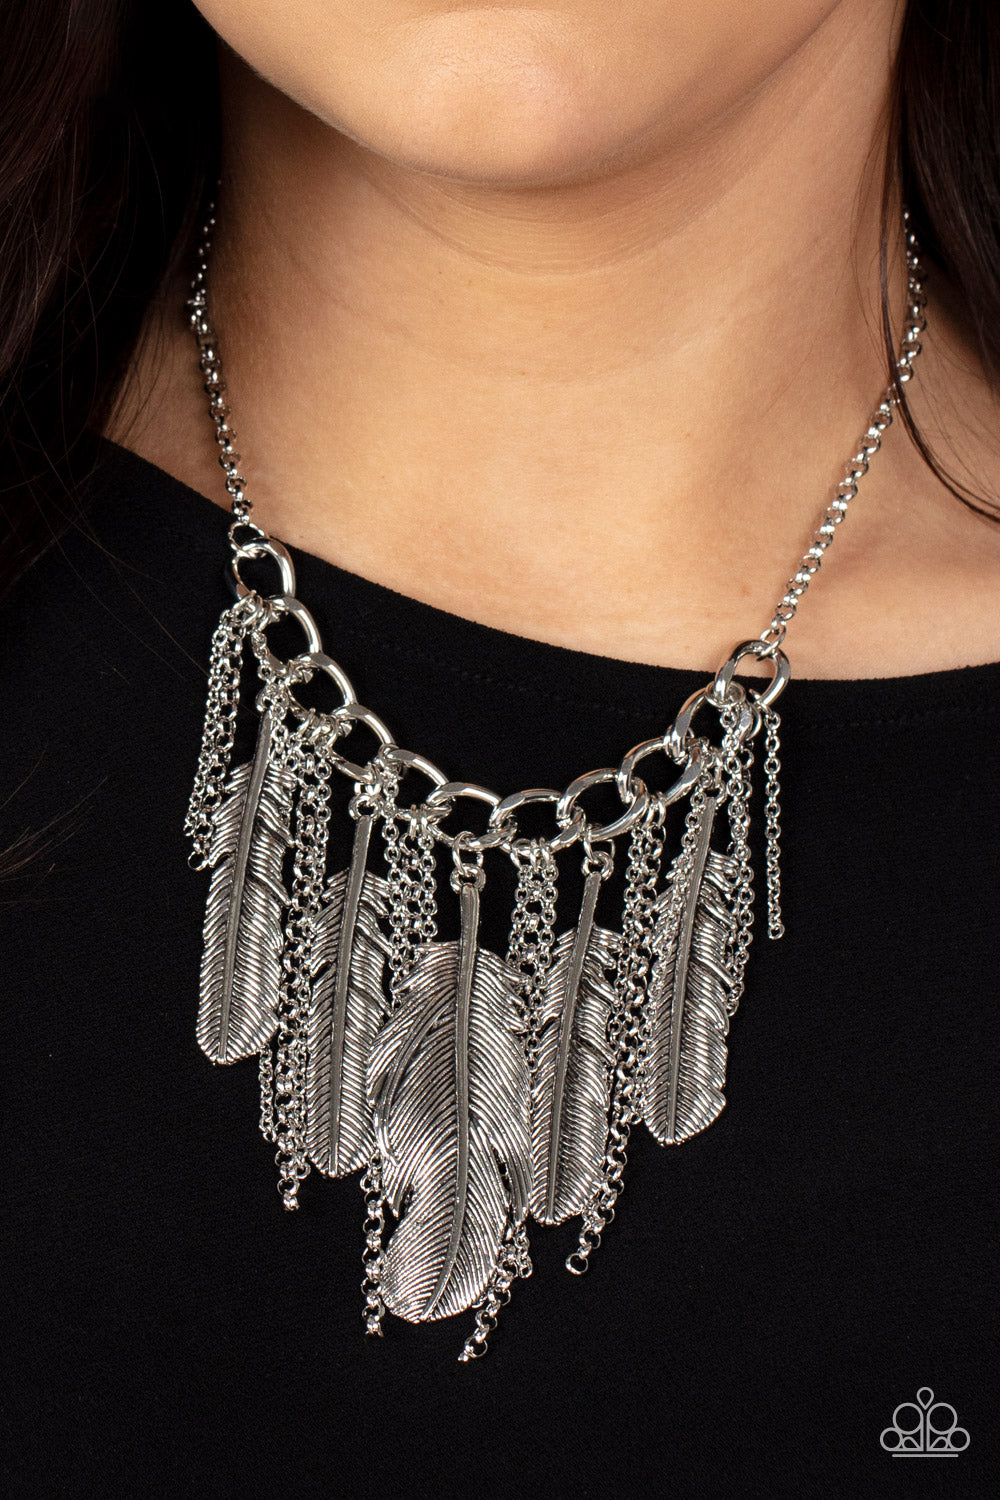 Paparazzi NEST Friends Forever - Silver Necklace online at AainaasTreasureBox! #P2ST-SVXX-177XX